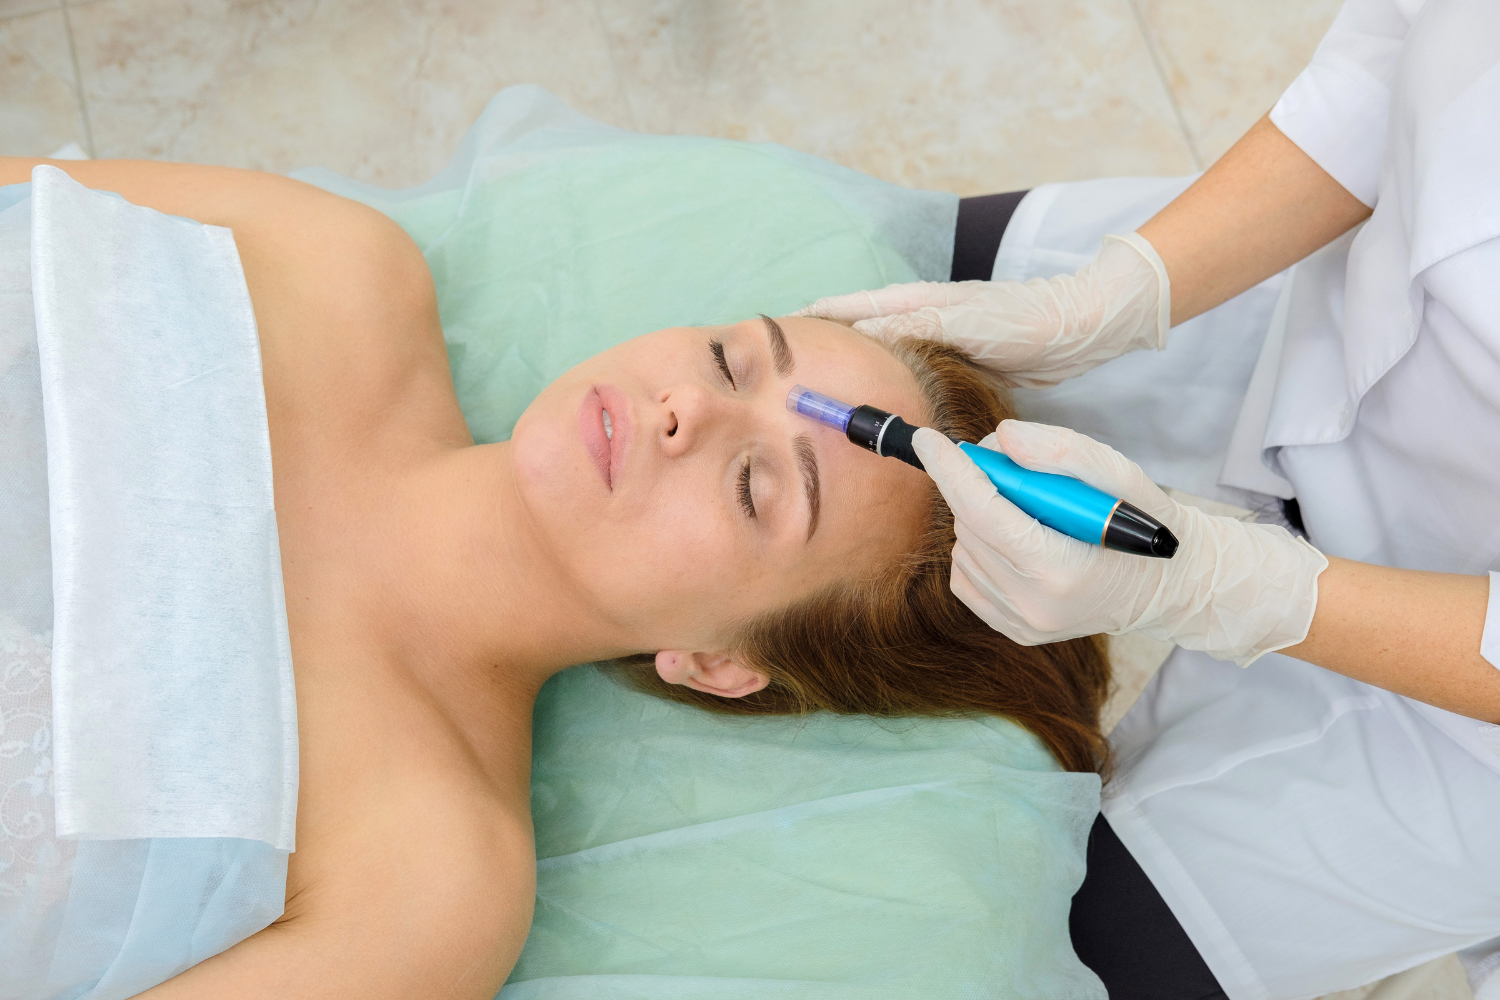 What Should You Do If You’re Getting A Micro-Needling Treatment?